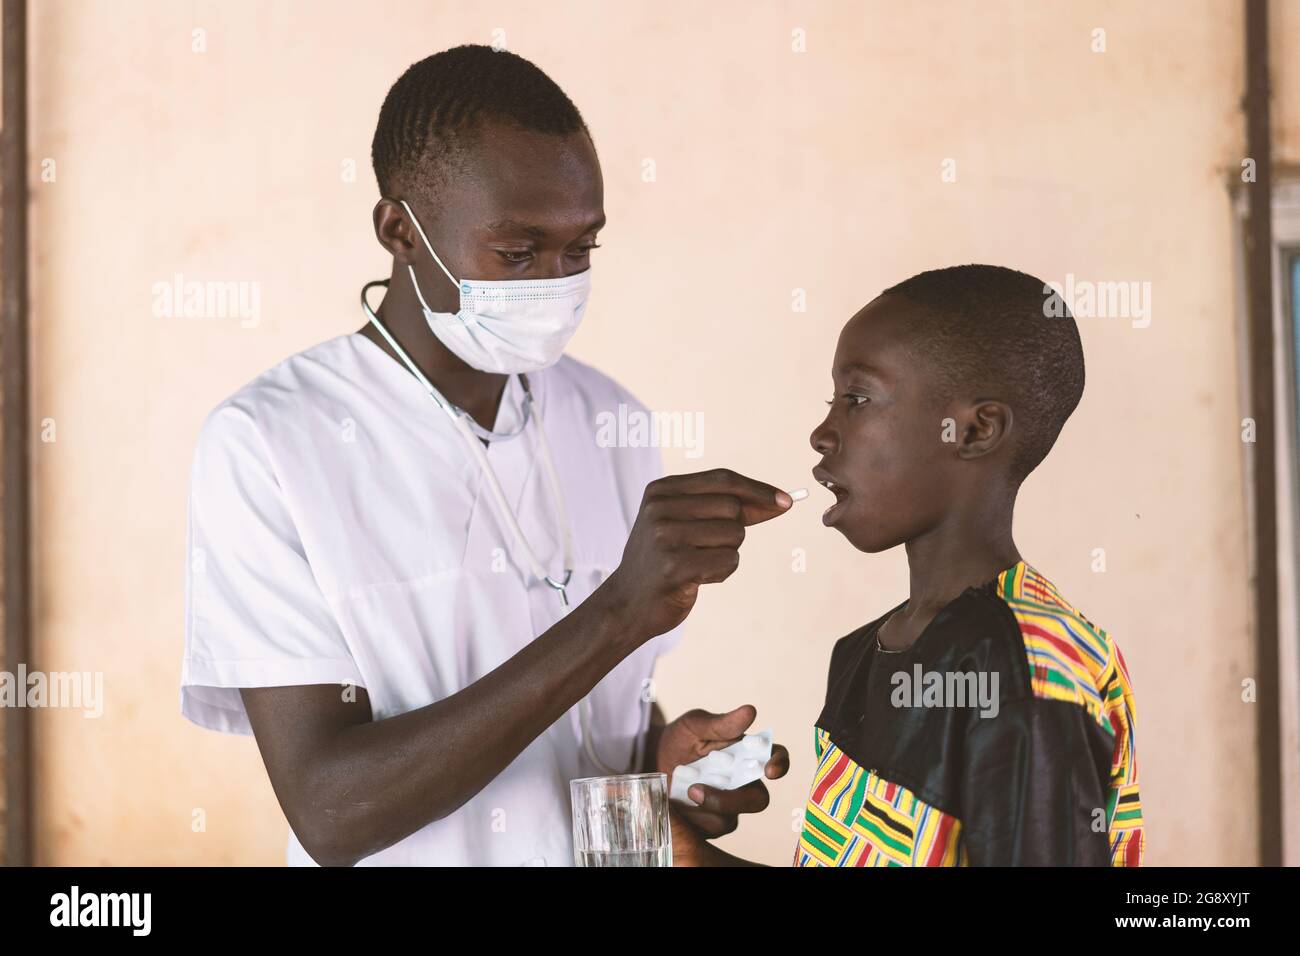 In this image a young medical trainee wearing a face mask is administering an oral medicament to a small collaborating schoolboy during a healthcare c Stock Photo